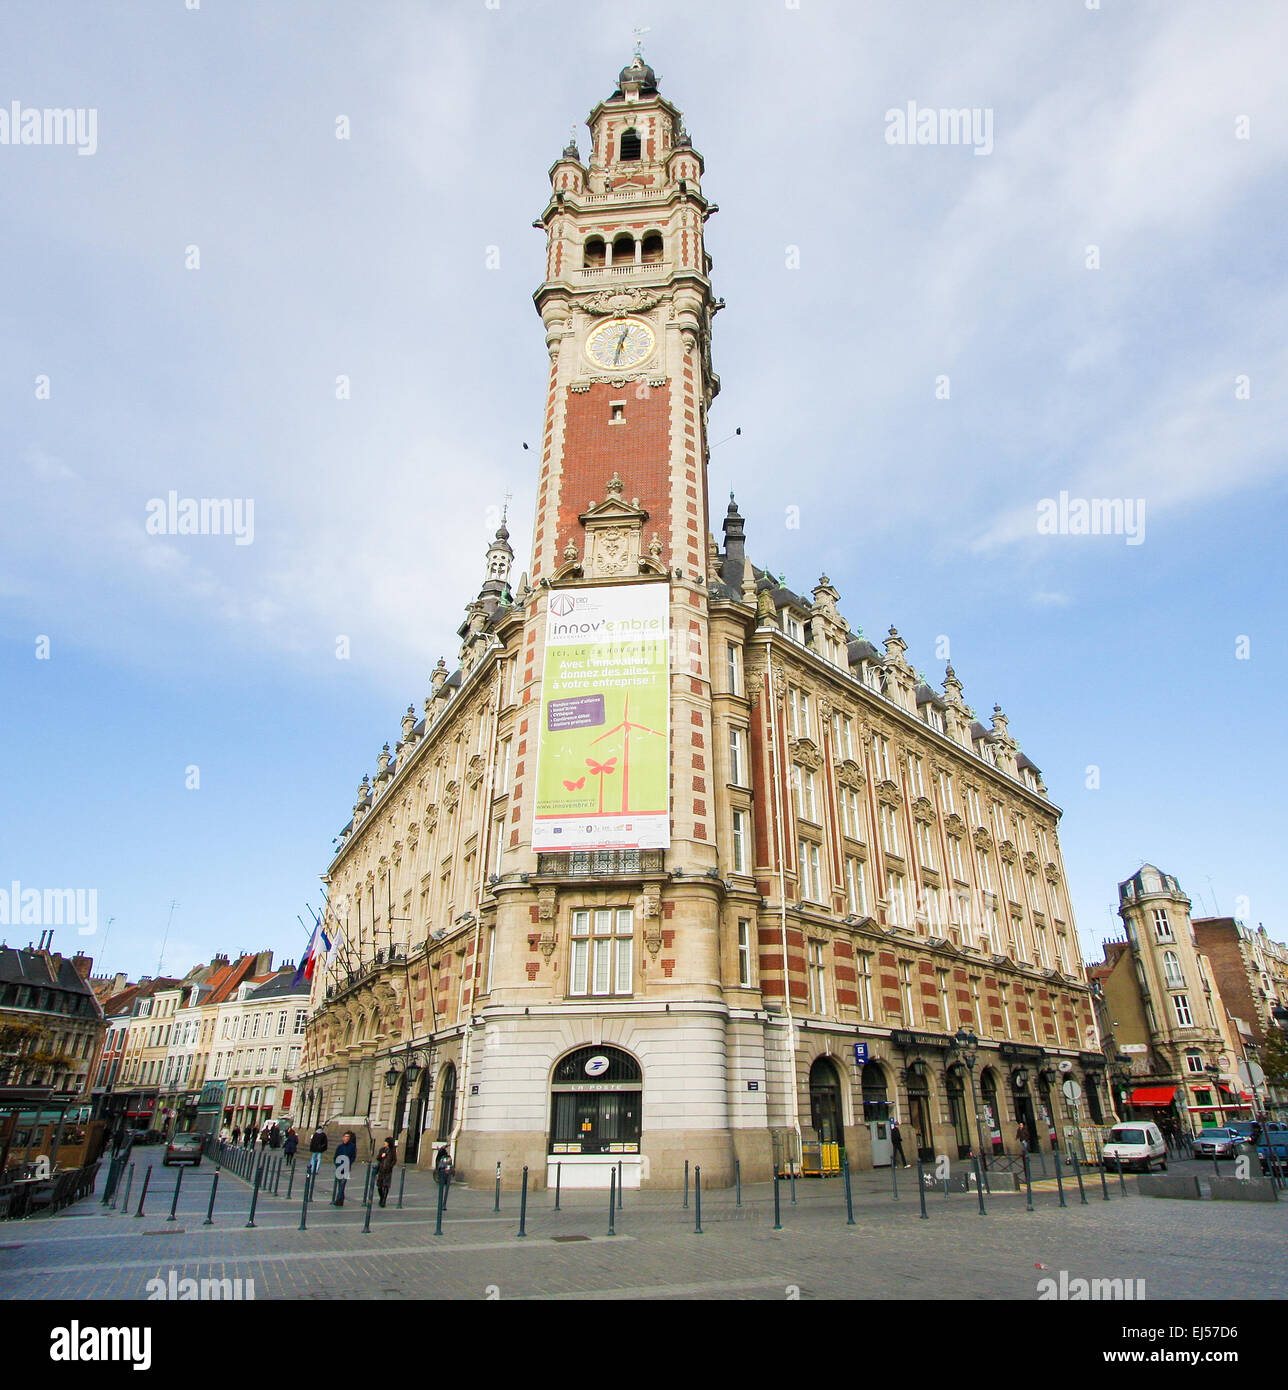 Chambre de Commerce in the center of Lille, France, one of the most famous buildings in the city. Stock Photo